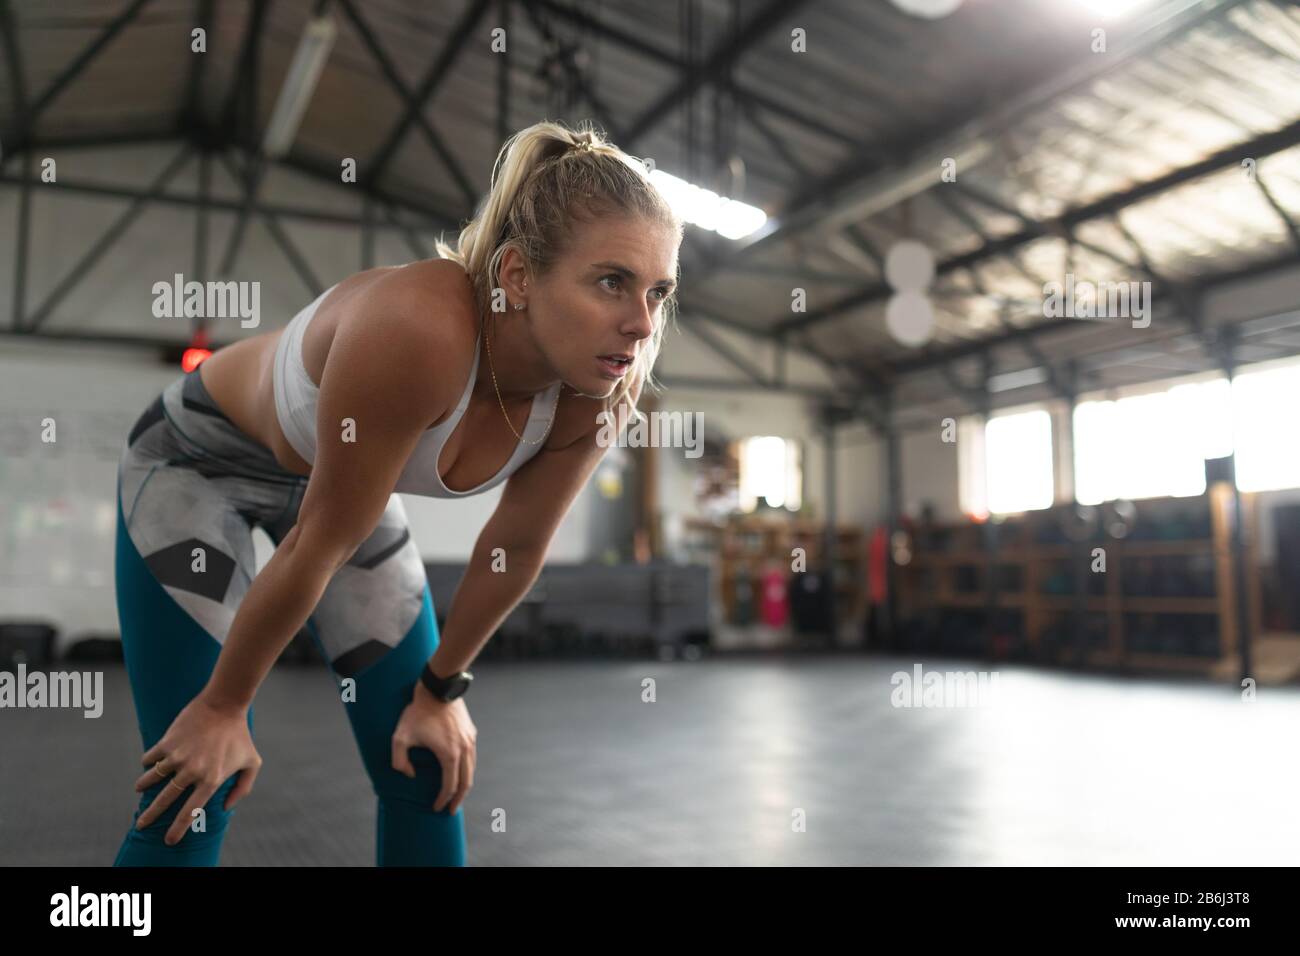 Sporty woman at cross training gym Stock Photo